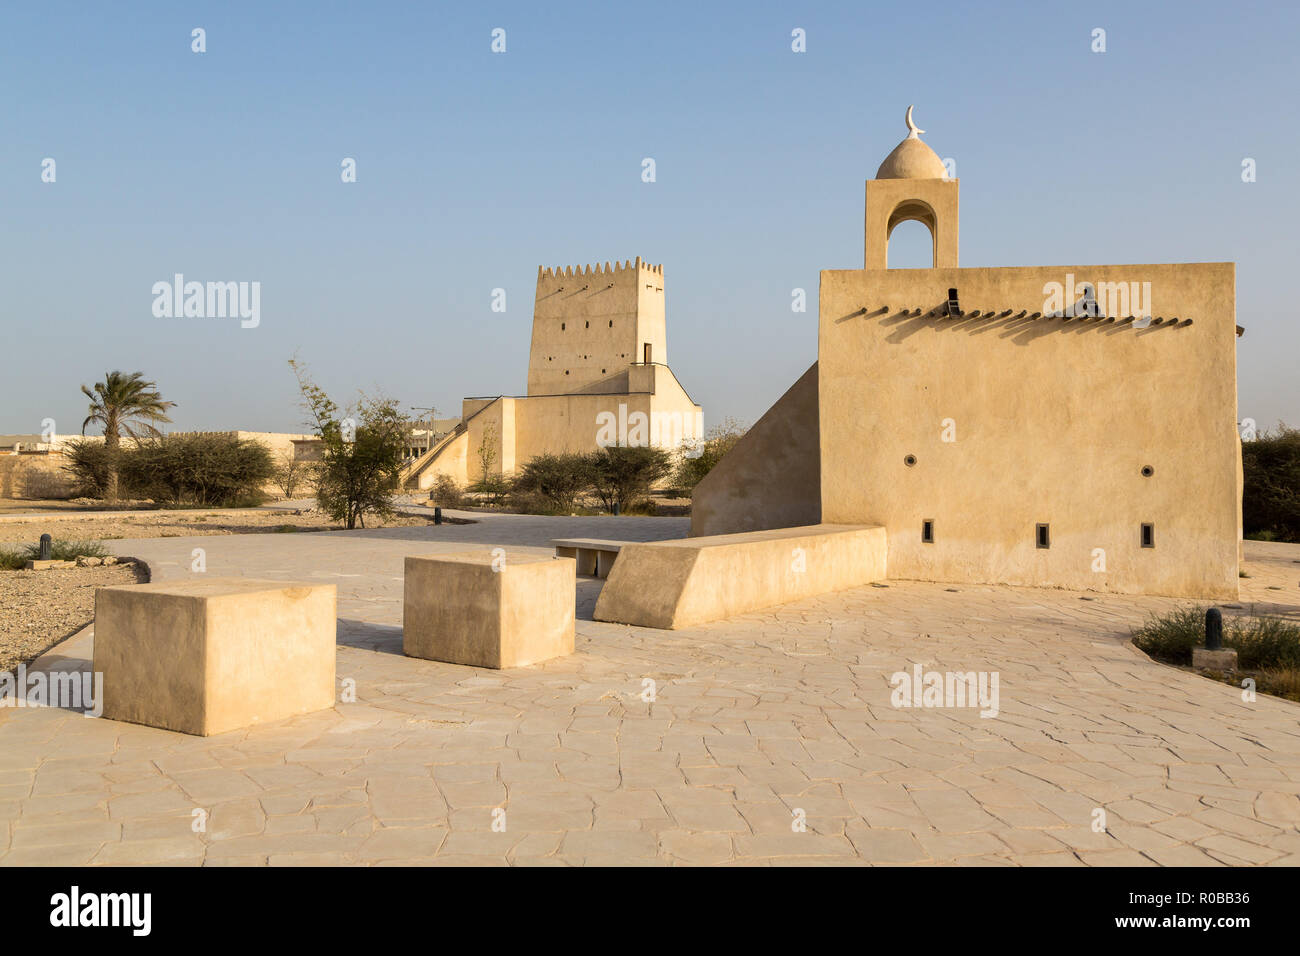 Barzan watchtowers and an Old mosque built with coral rock and limestone, Umm Salal Mohammed Fort Towers, ancient Arabian fortification near Umm Salal Stock Photo